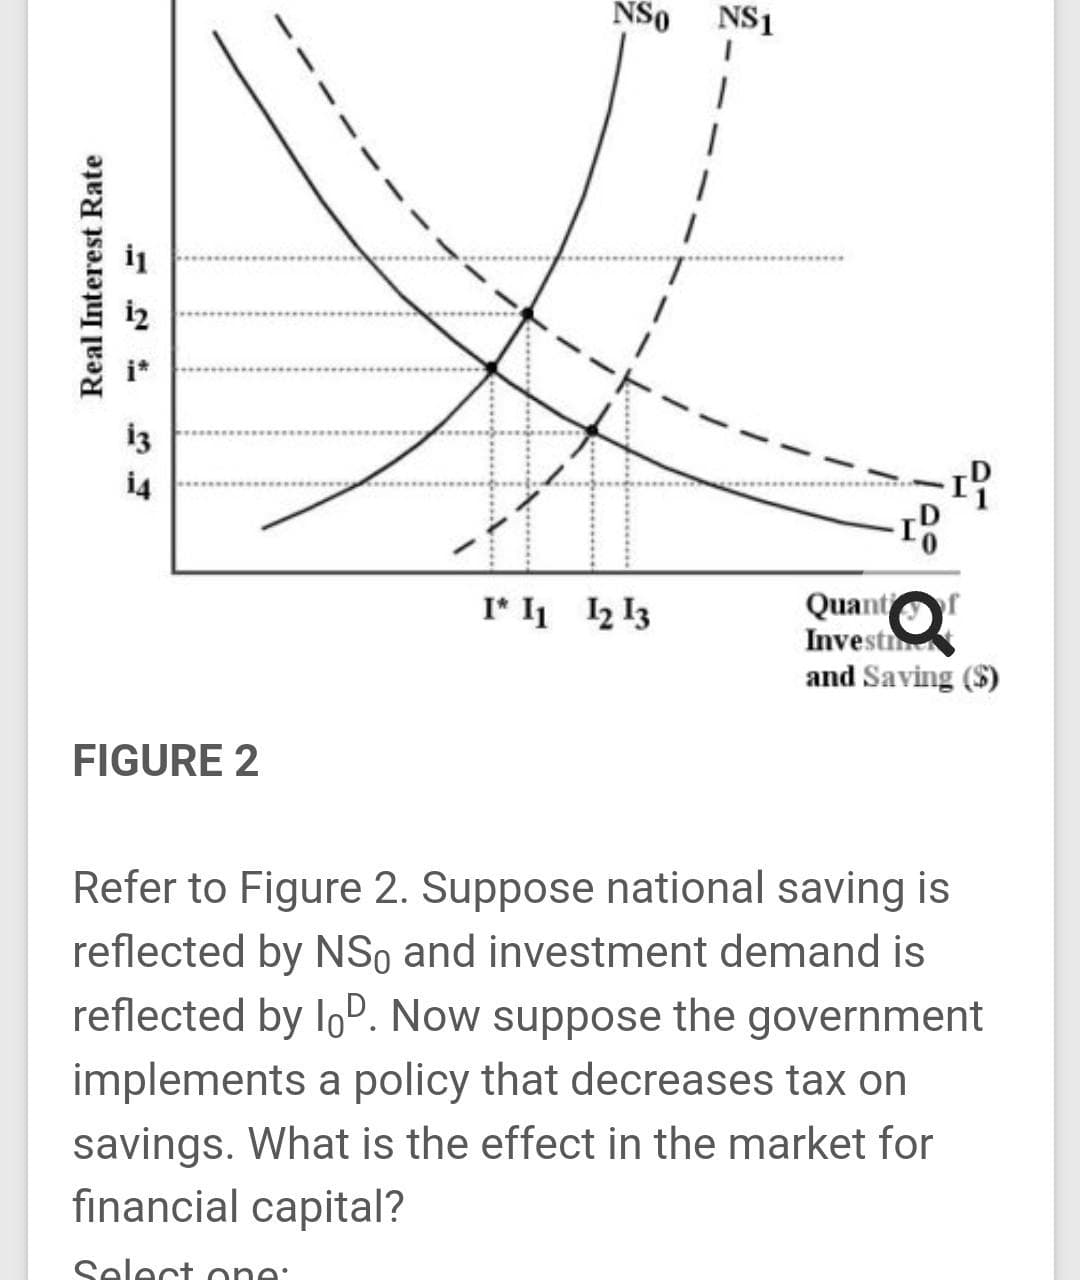 NSo
NS1
i4
Quanti
Investi
and Saving ($)
I* I1 12 13
FIGURE 2
Refer to Figure 2. Suppose national saving is
reflected by NSo and investment demand is
reflected by IoP. Now suppose the government
implements a policy that decreases tax on
savings. What is the effect in the market for
financial capital?
Select one:
Real Interest Rate
